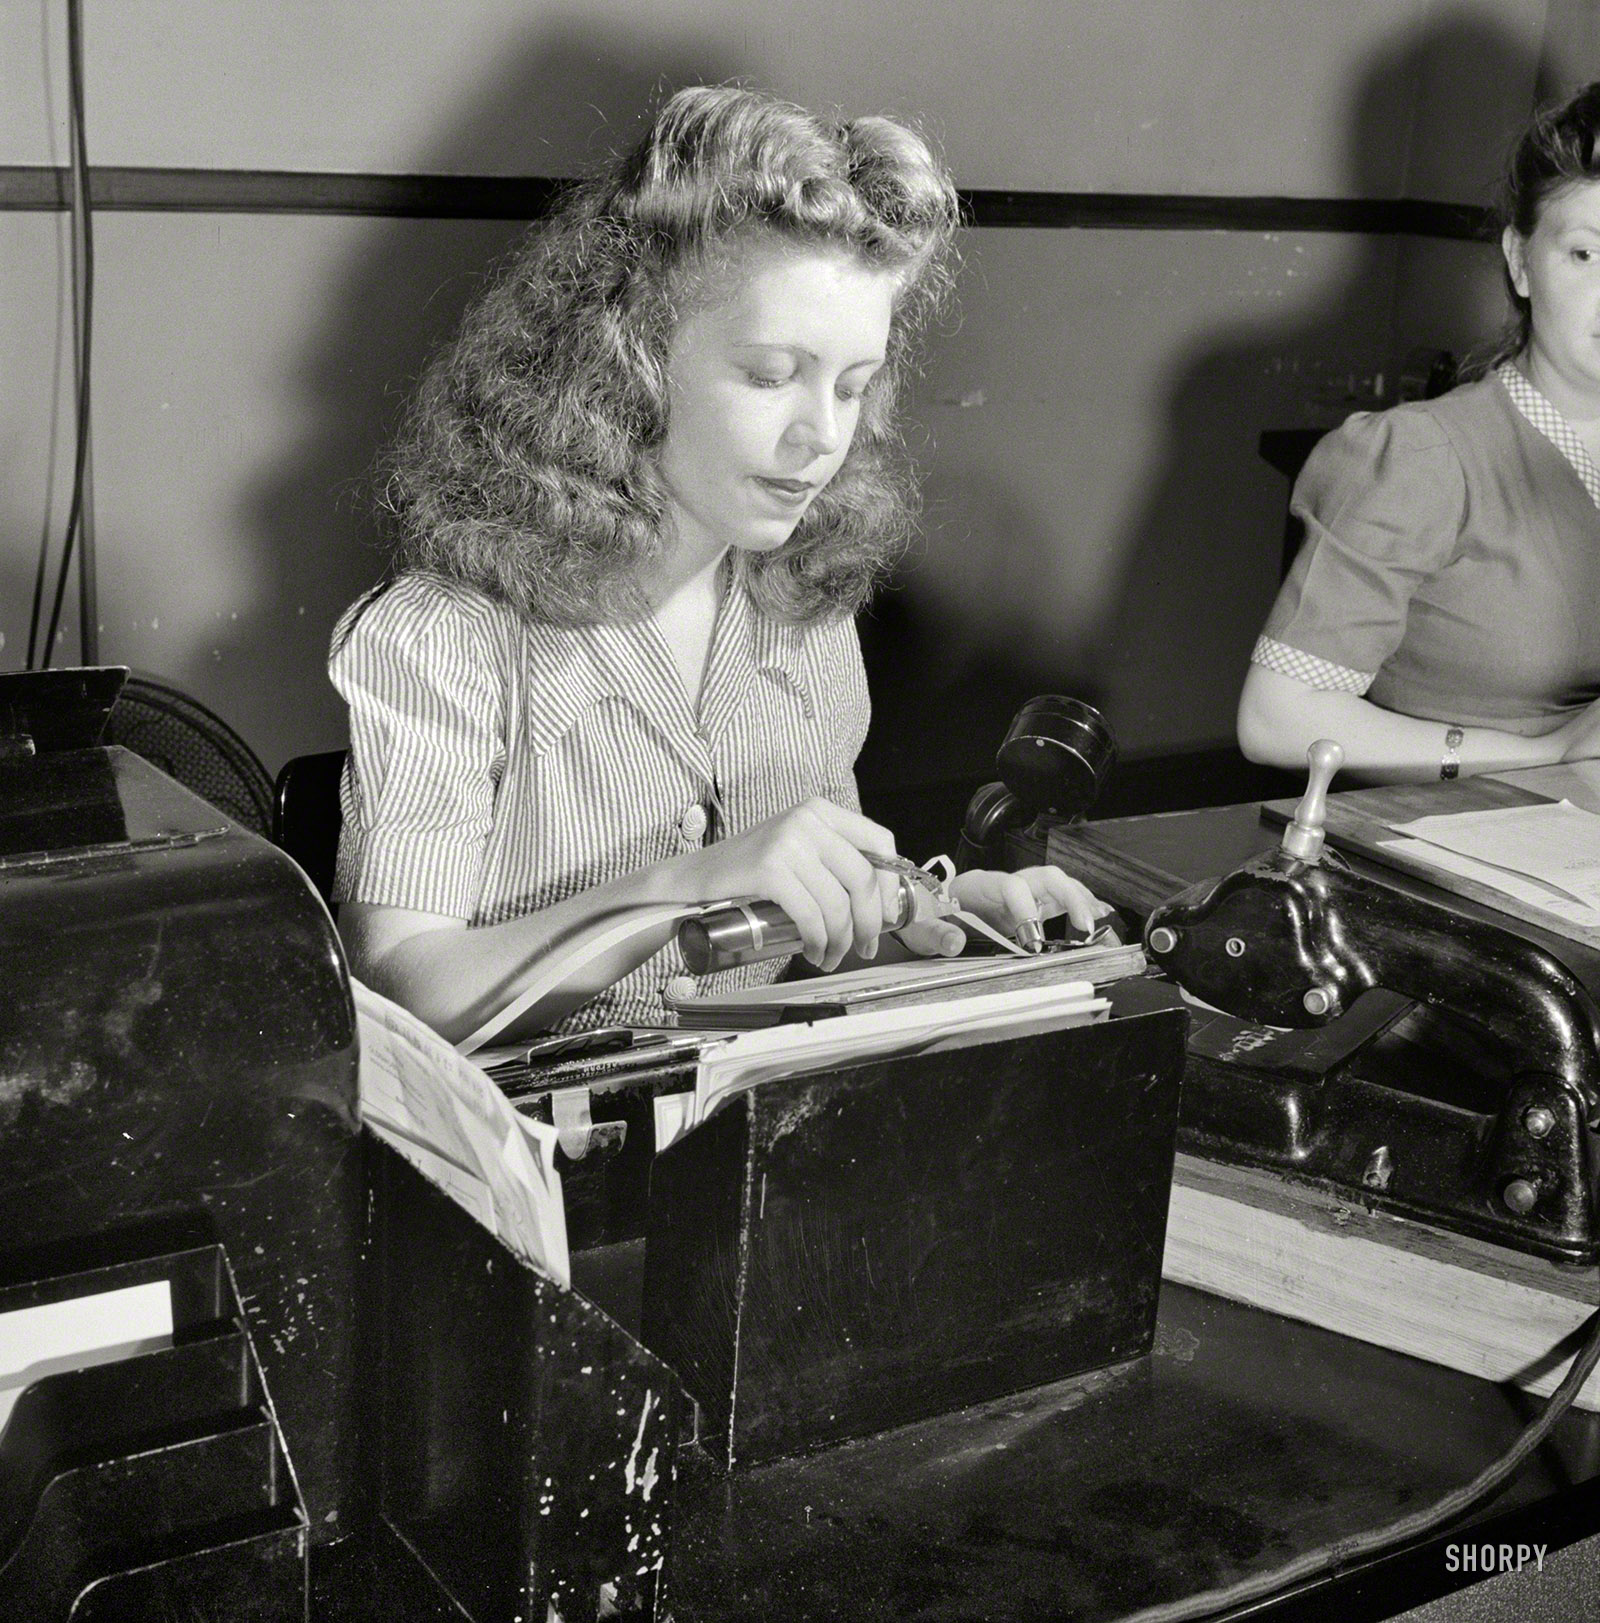 &nbsp; &nbsp; &nbsp; So many of you guessed correctly on this one that we're not going to wait till tomorrow for the answer -- the lady's job is: Telegram gummer. Original caption for the photo, taken by Esther Bubley: "June 1943. Miss Kathleen McCarthy, a Western Union teleprinter operator, gumming telegraph messages."

The year is 1943 and the place is Washington, D.C. What is this girl doing? (Hint: Hundreds if not thousands of people had the same job over the course of many years.) Check back on Sunday for the answer. View full size.